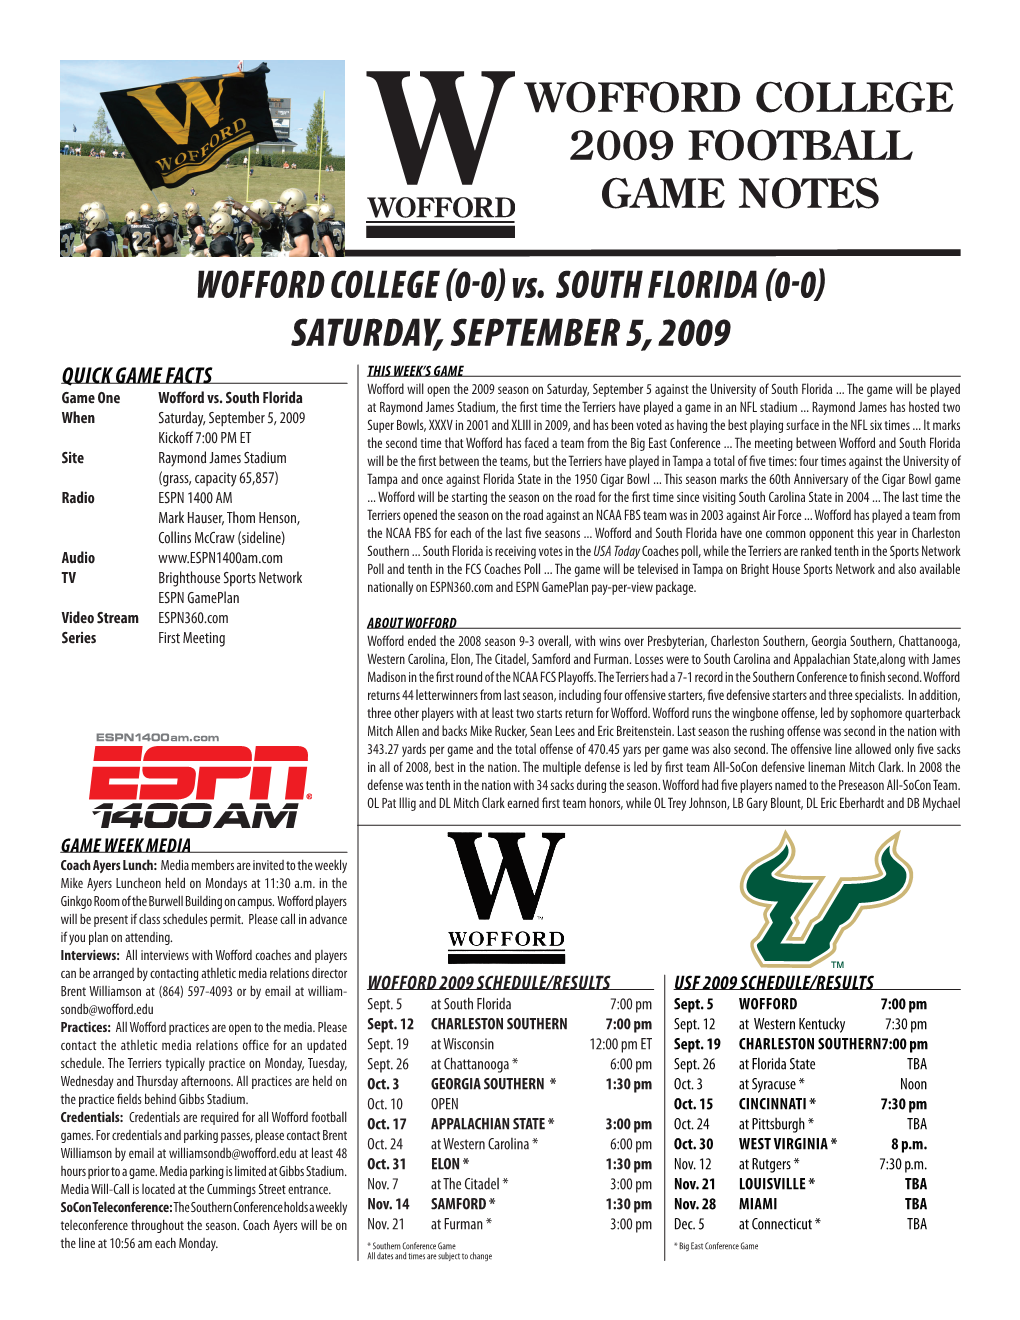 WOFFORD COLLEGE 2009 FOOTBALL GAME NOTES Wofford